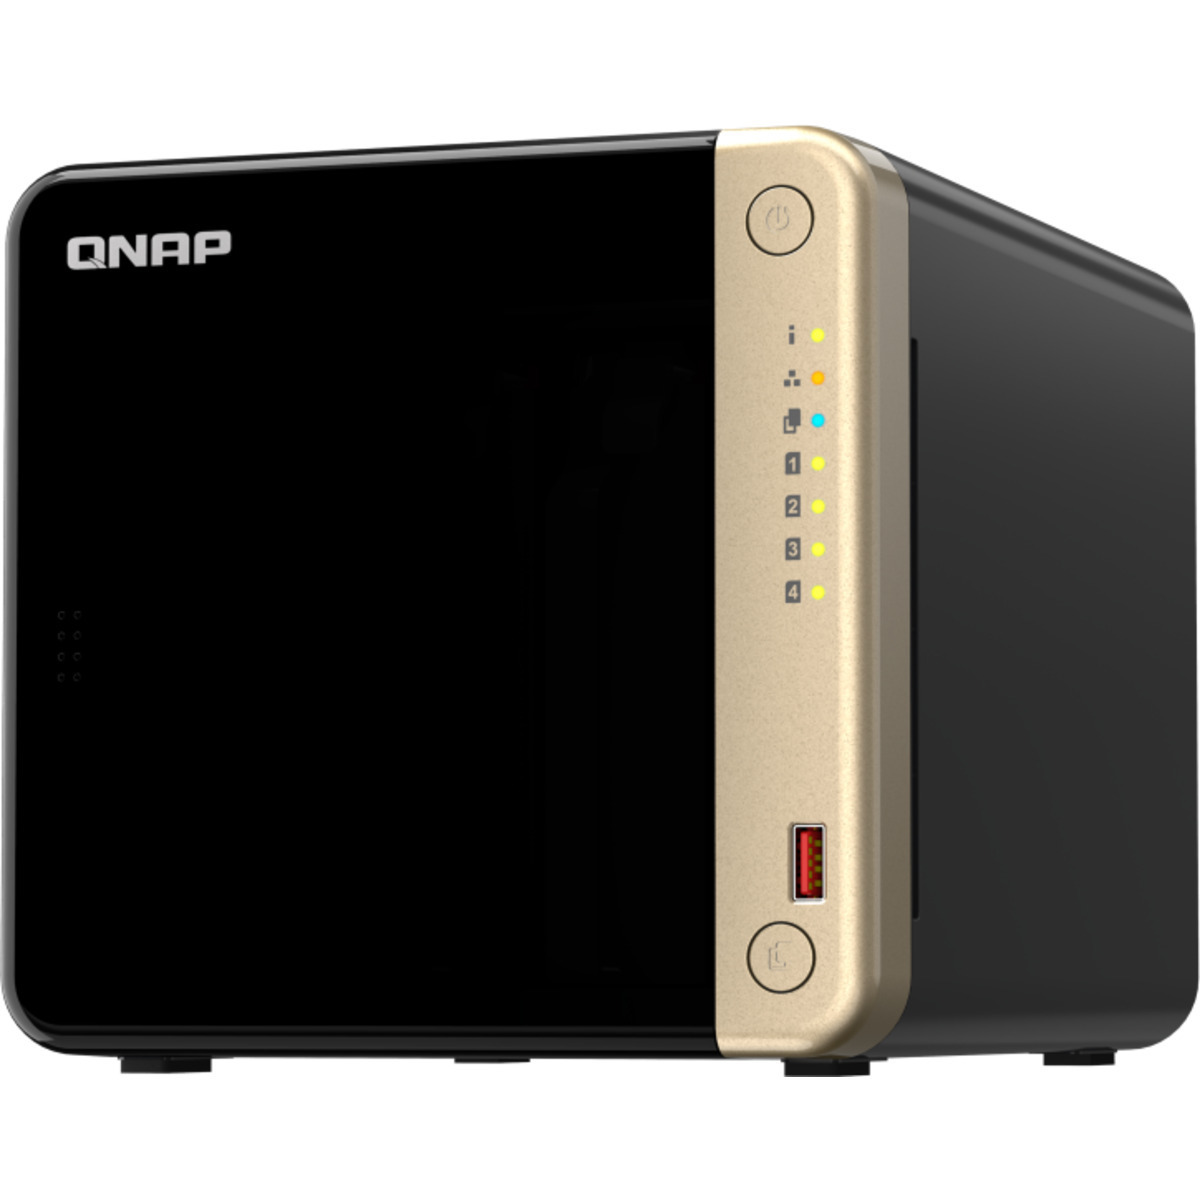 buy QNAP TS-464 88tb Desktop NAS - Network Attached Storage Device 4x22000gb Seagate IronWolf Pro ST22000NT001 3.5 7200rpm SATA 6Gb/s HDD NAS Class Drives Installed - Burn-In Tested - ON SALE - nas headquarters buy network attached storage server device das new raid-5 free shipping usa spring sale TS-464